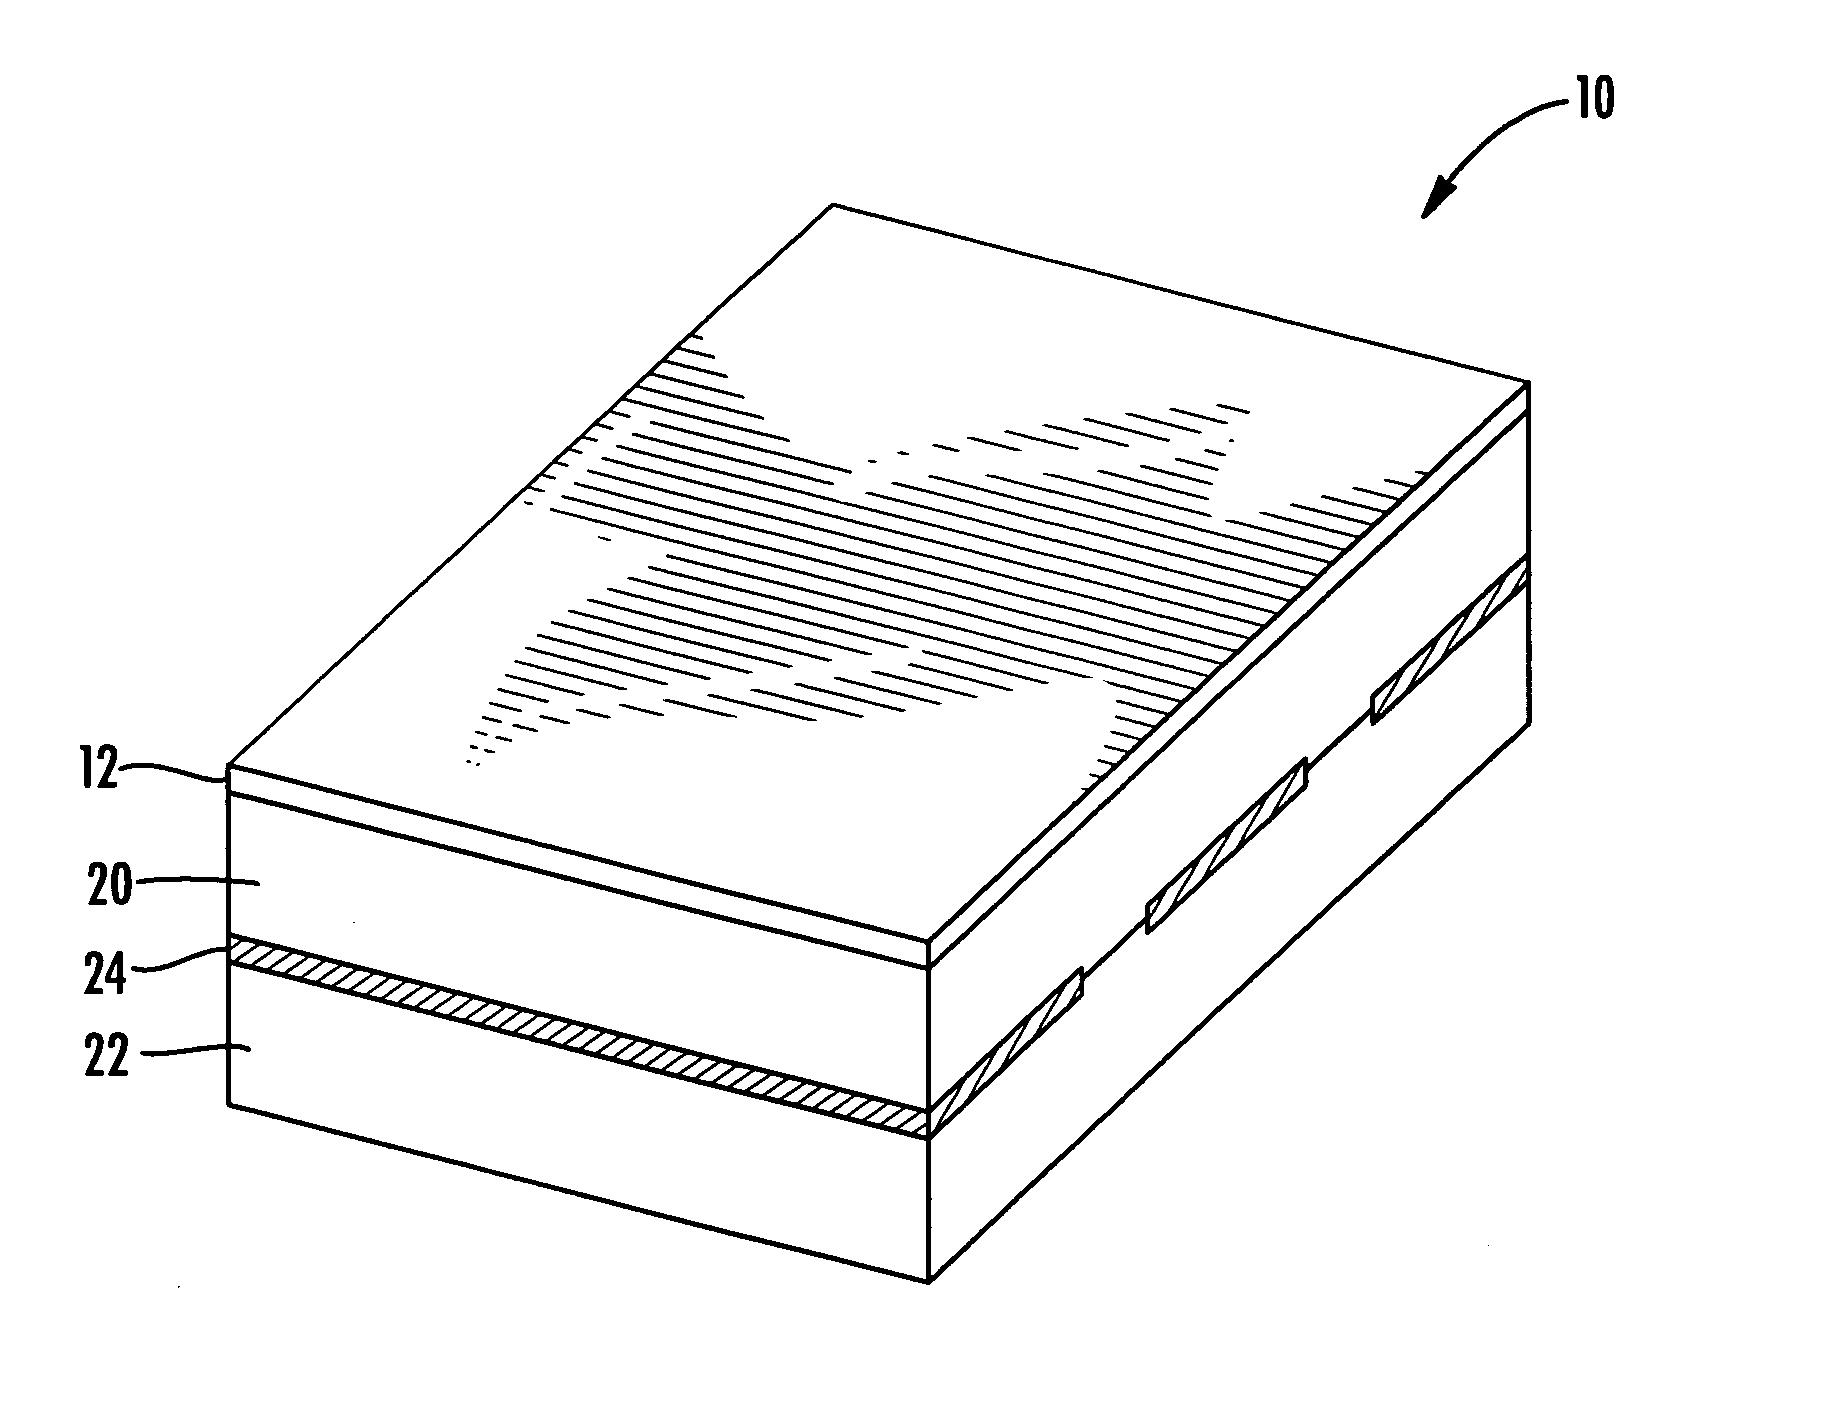 Light guide display systems and related methods, systems, and computer program products